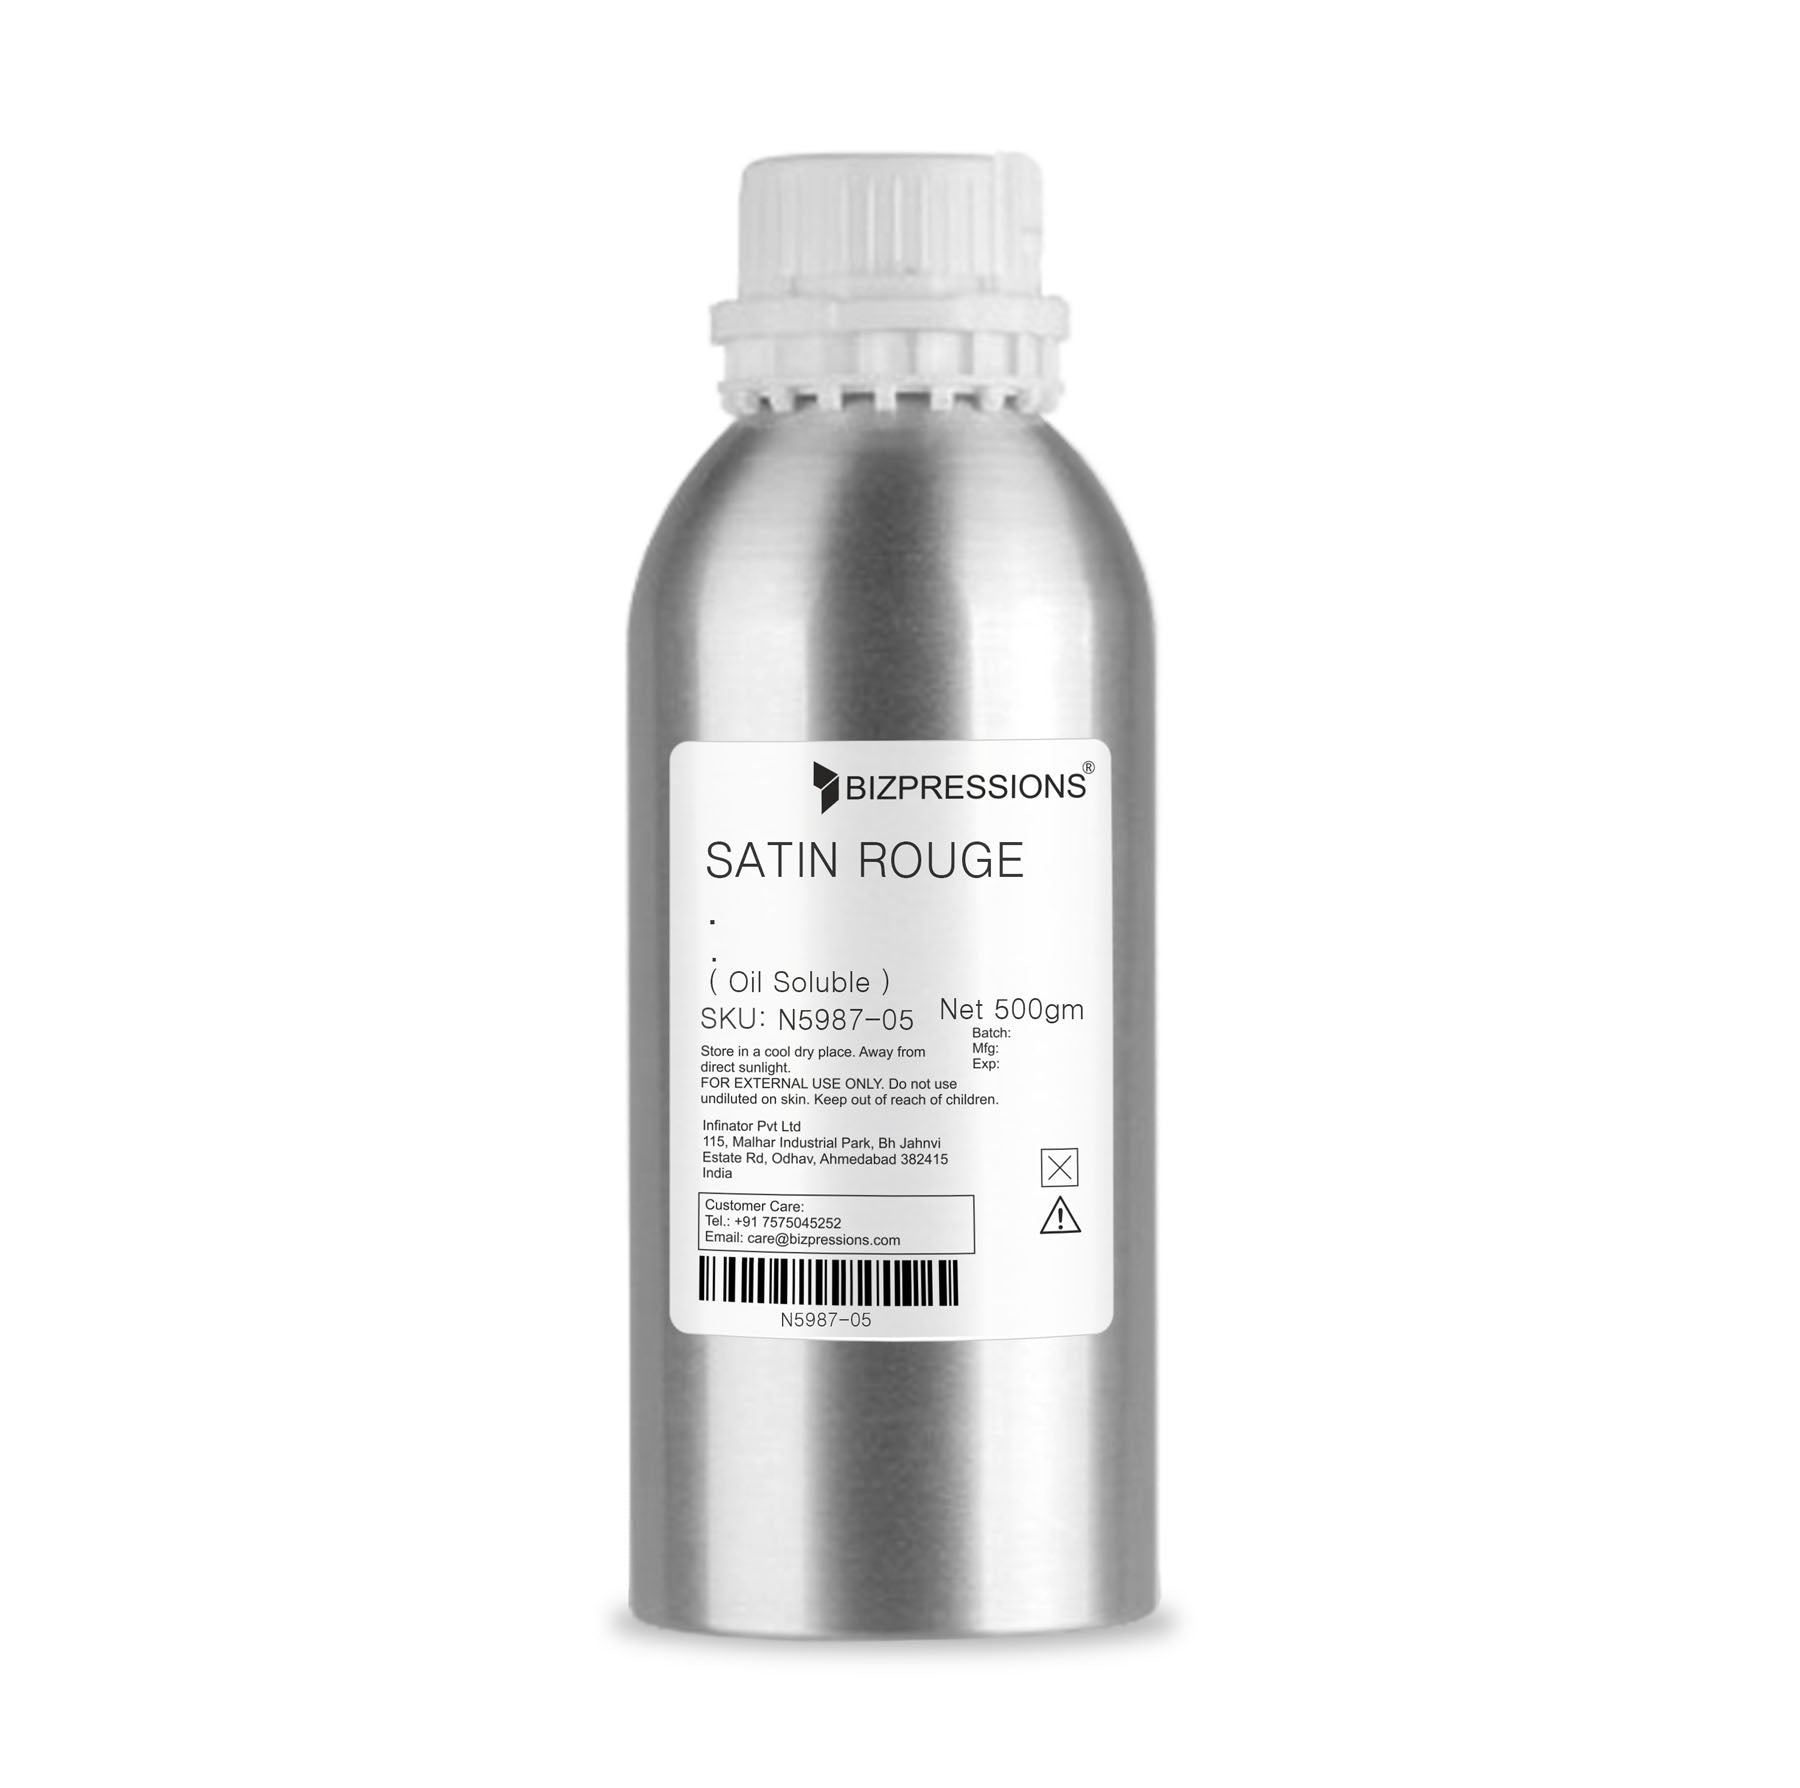 SATIN ROUGE - Fragrance ( Oil Soluble ) - 500 gm